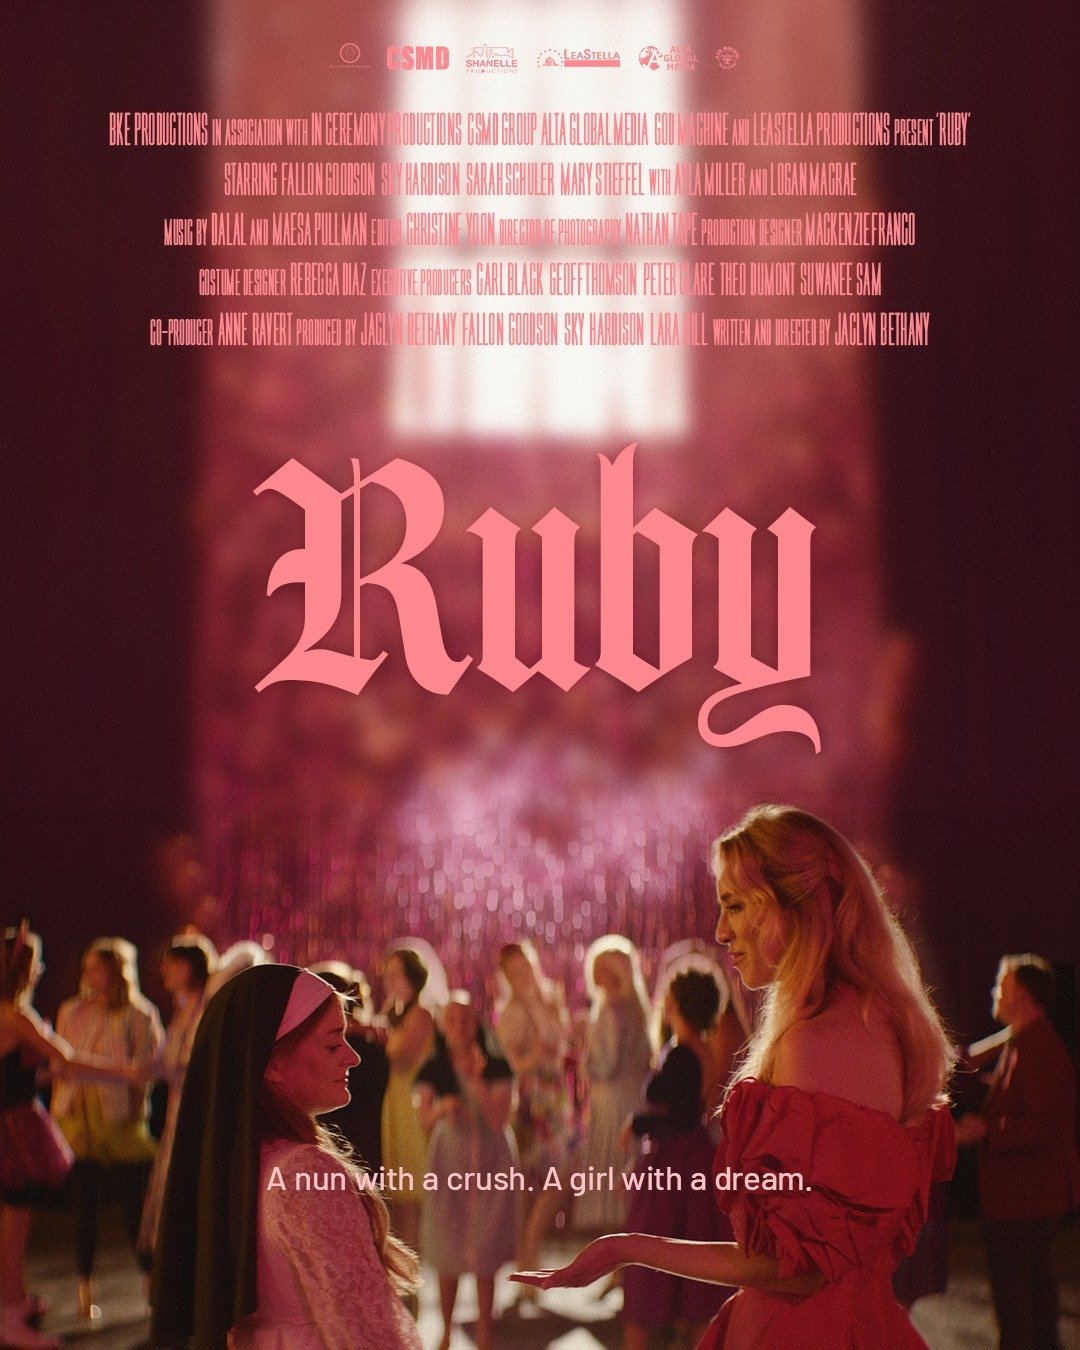 RUBY is finally finished!!! I'm so proud of this short film that my friend Jaclyn Bethany wrote and directed here in New Orleans - an incredibly sweet and charming story of an embrace of yourself that breaks barriers. Honored to be a part of this tea